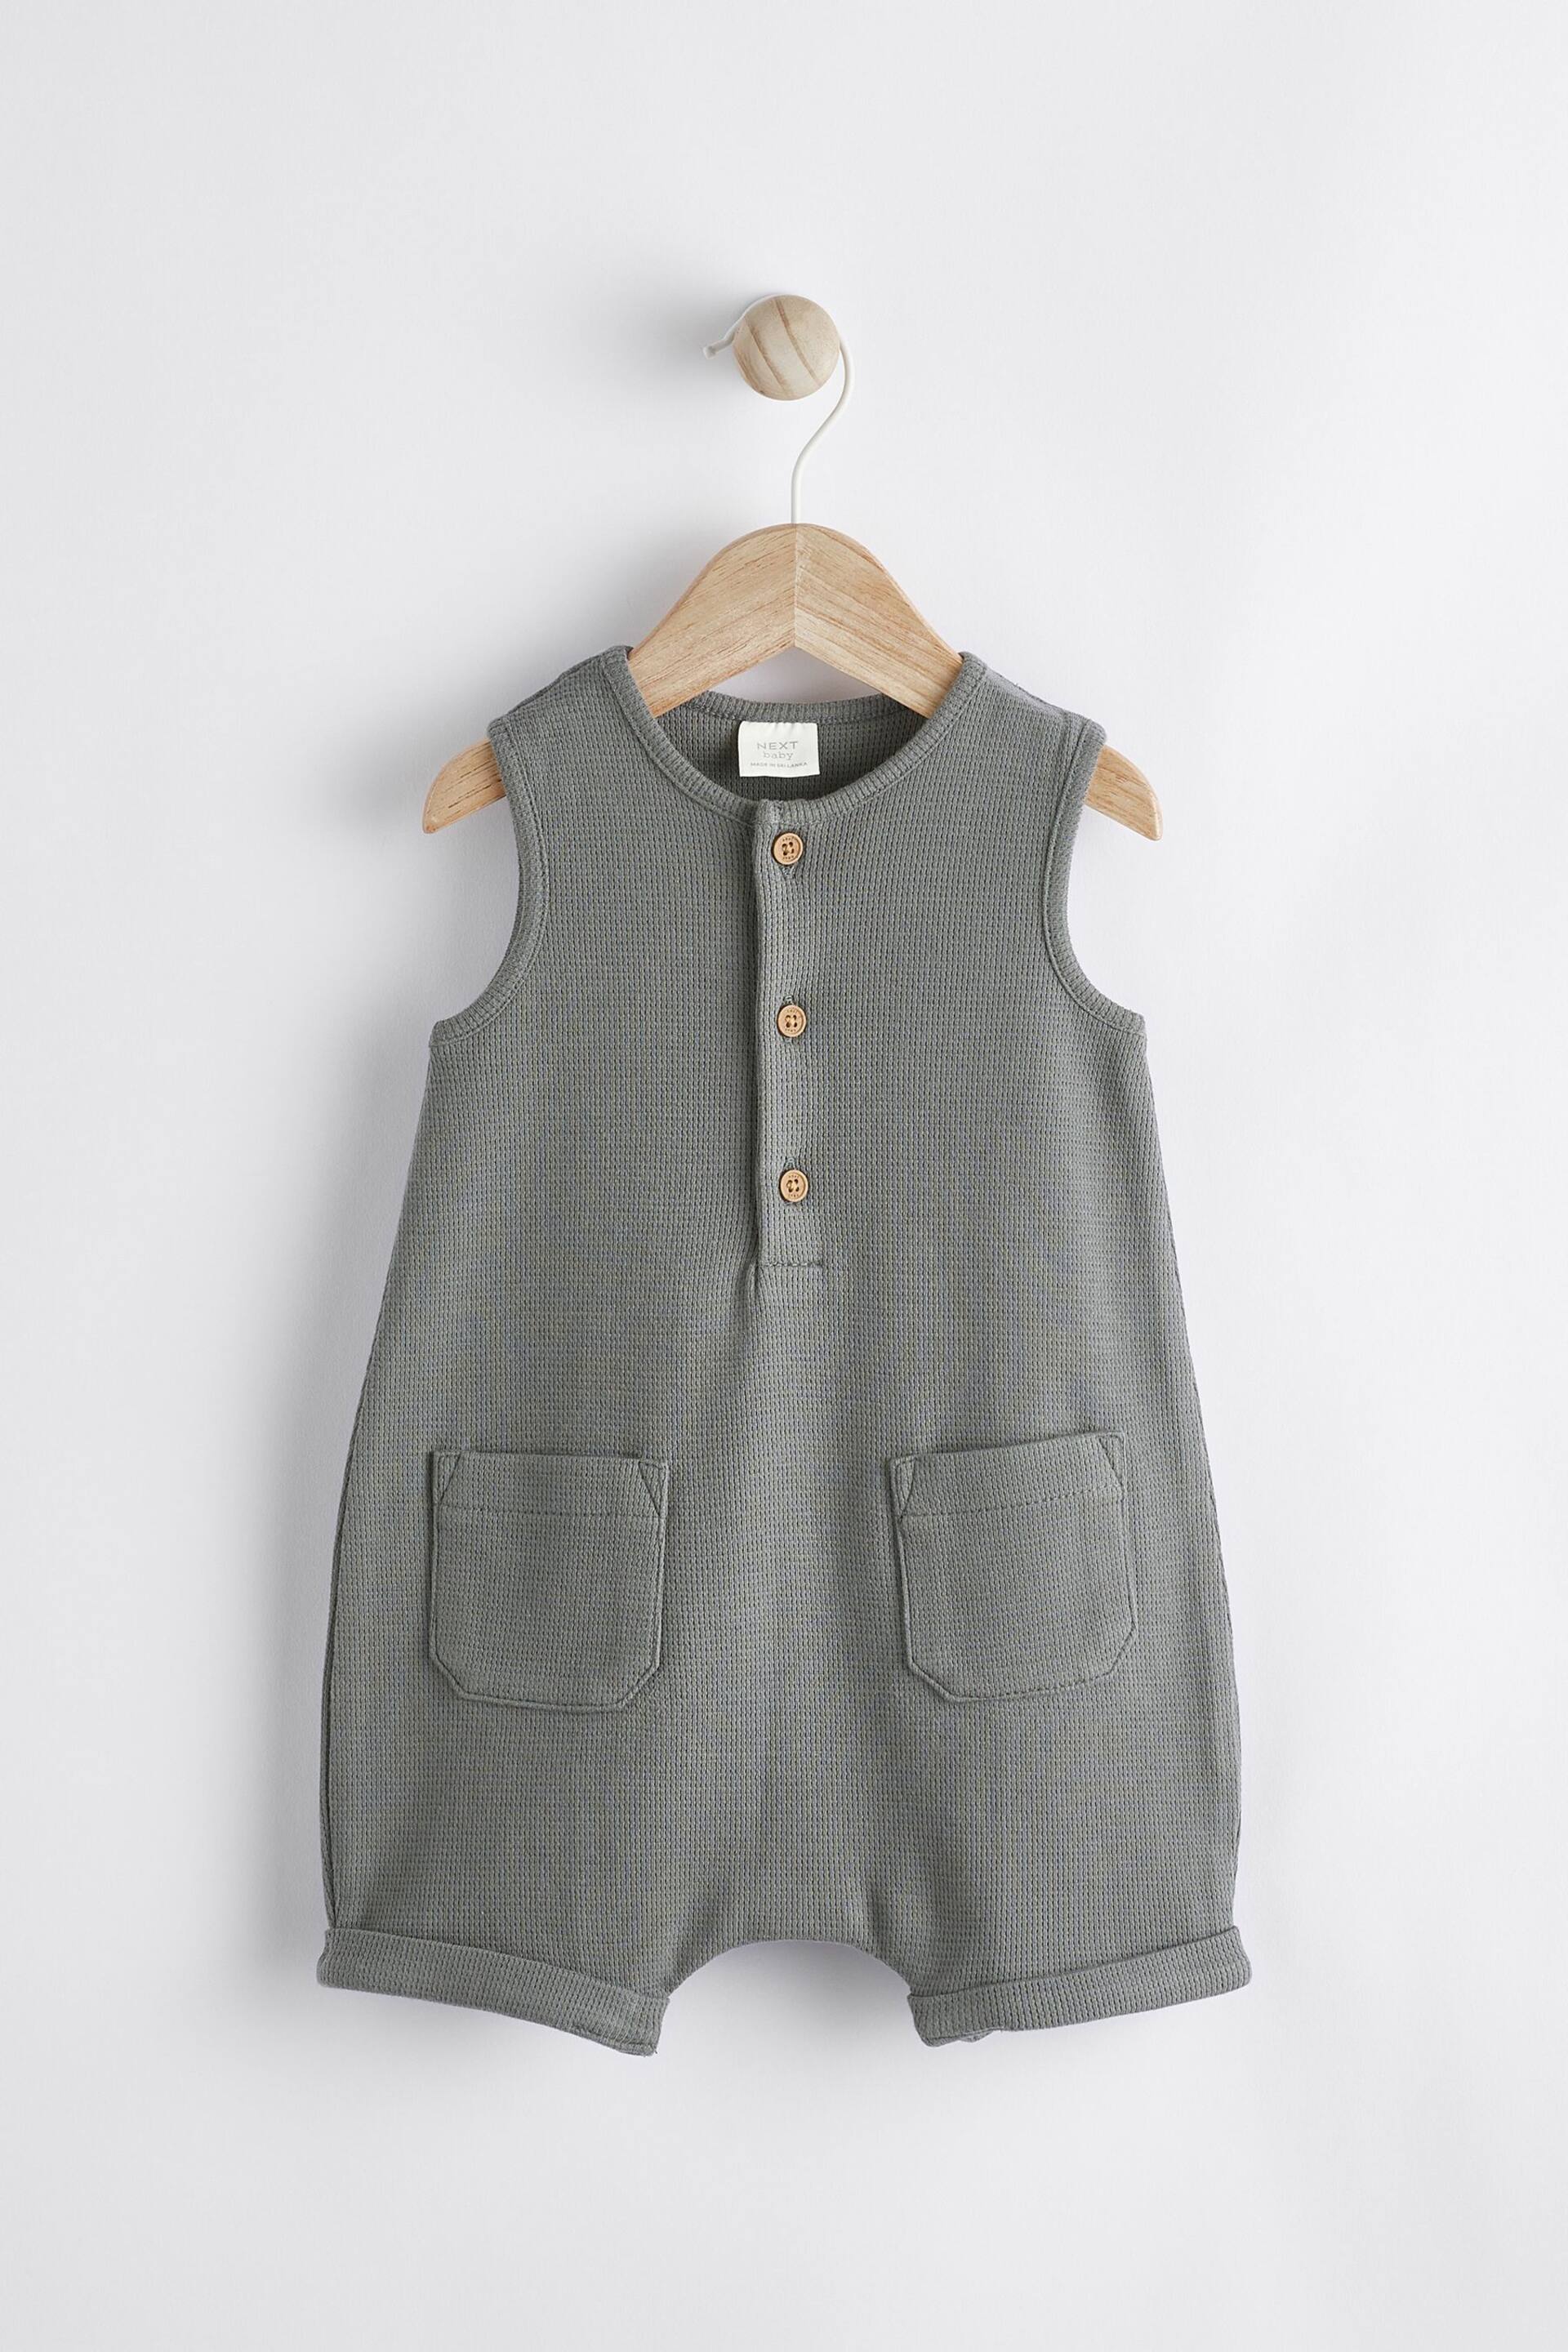 Charcoal Grey Baby Textured Jersey Romper (0mths-2yrs) - Image 1 of 7